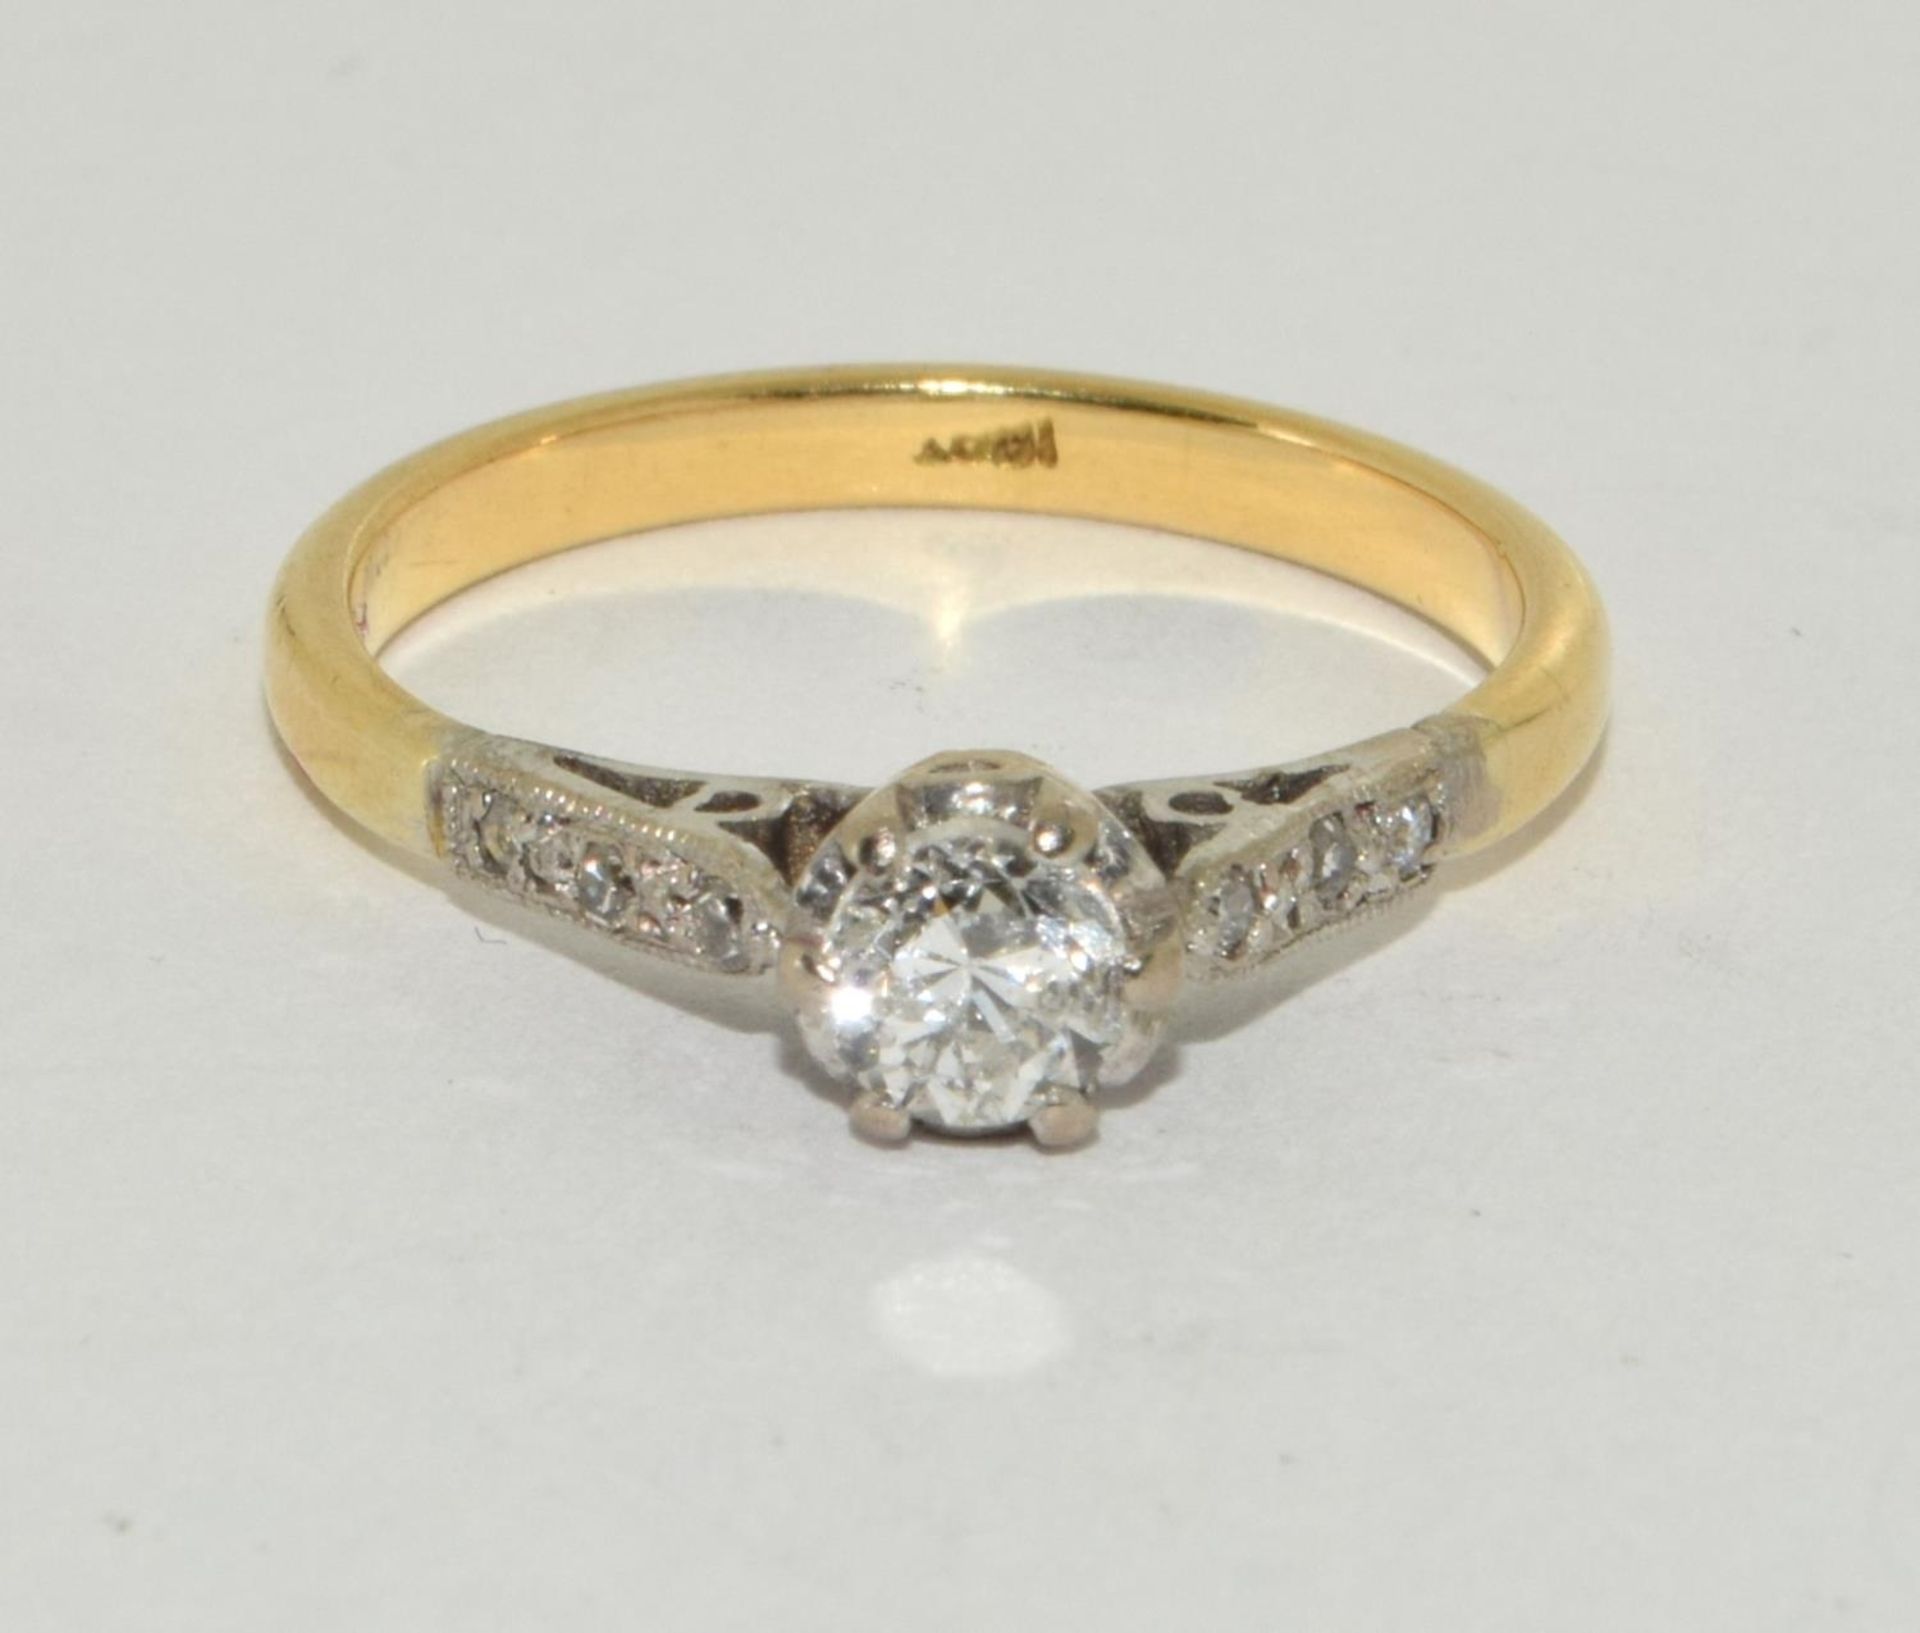 An old 18ct diamond solitaire 0.25ct minimum rose cut diamond shank ring Size L 1/2. - Image 5 of 5